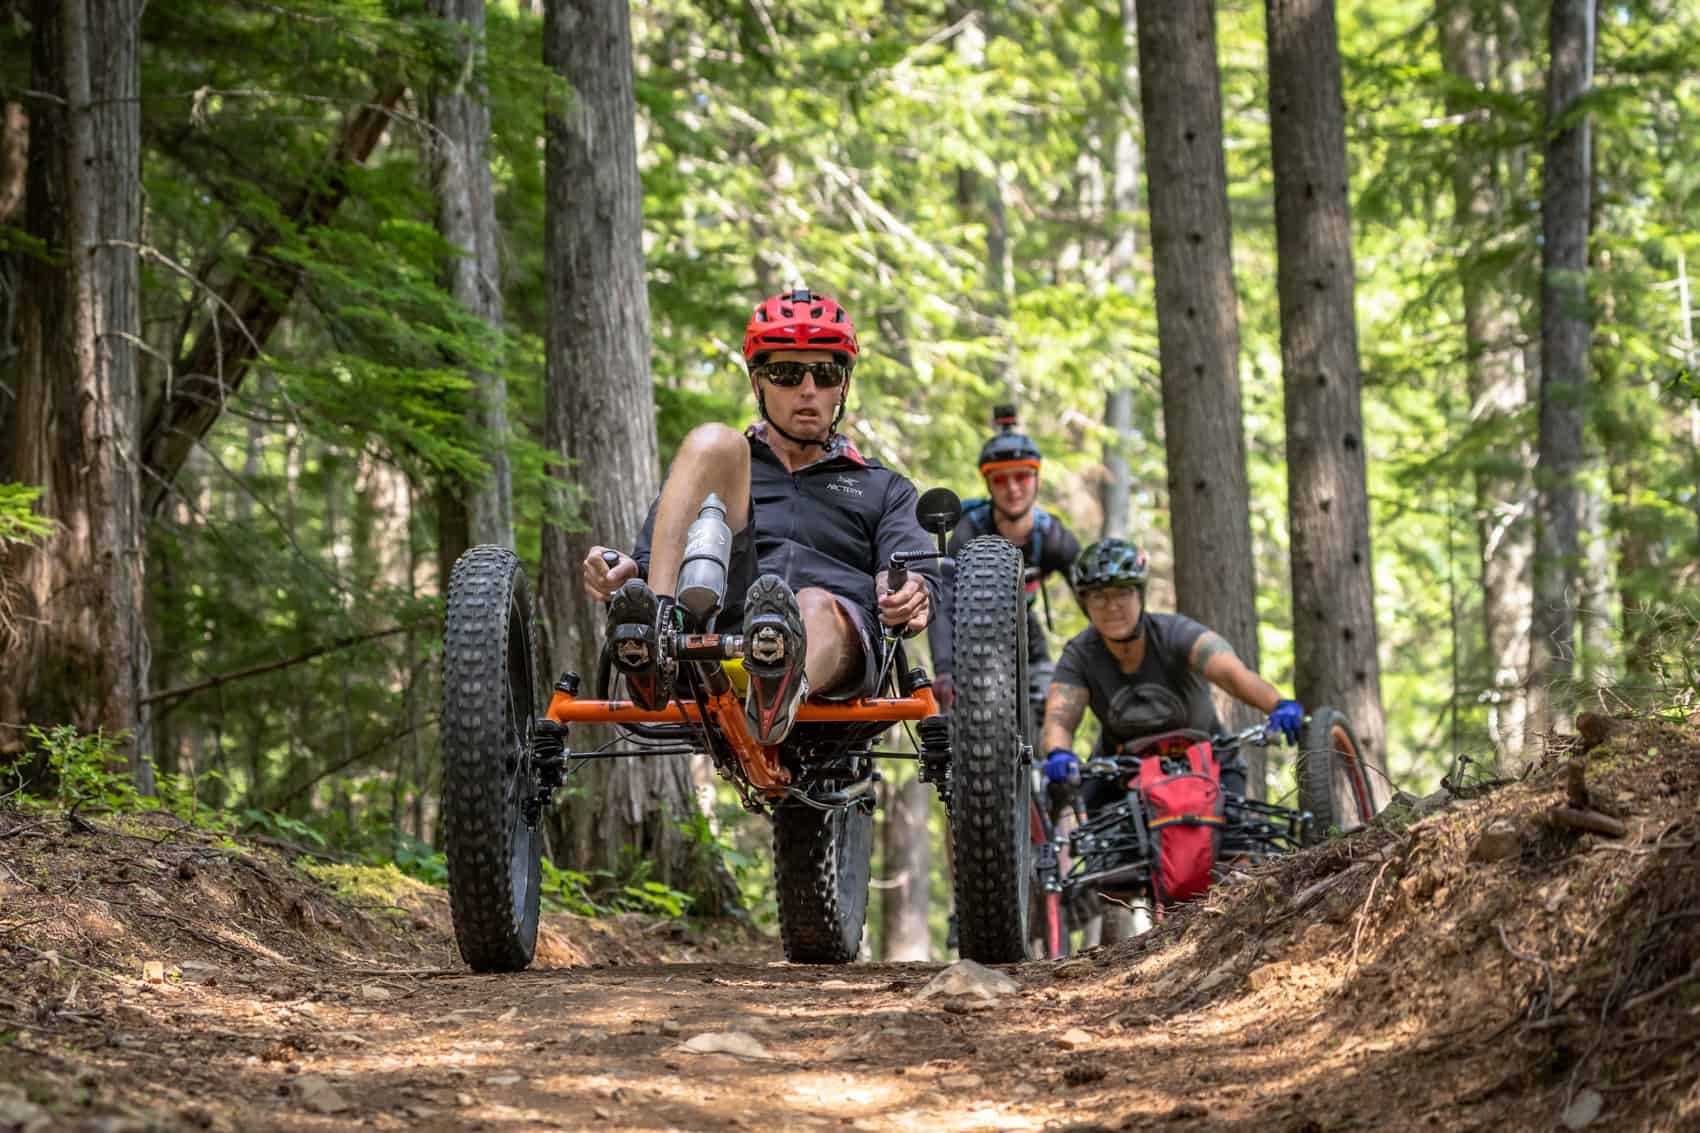 Adaptive riders on Miller Time. Photo: Tom Poole